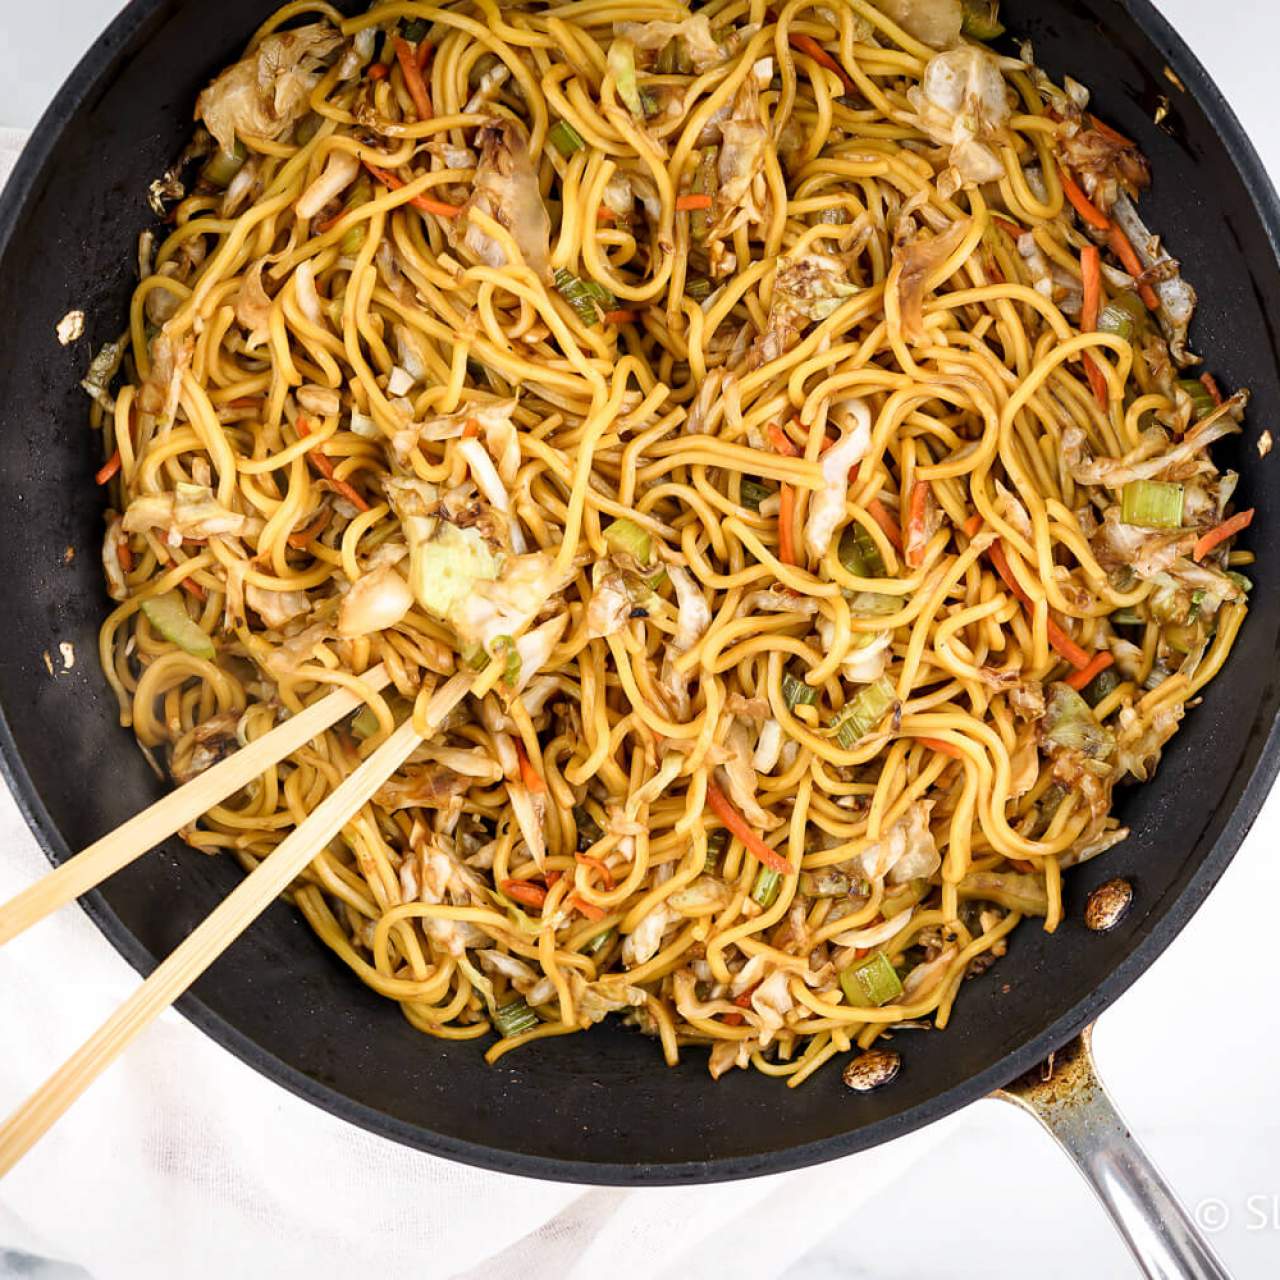 Are chow mei fun noodles healthy?